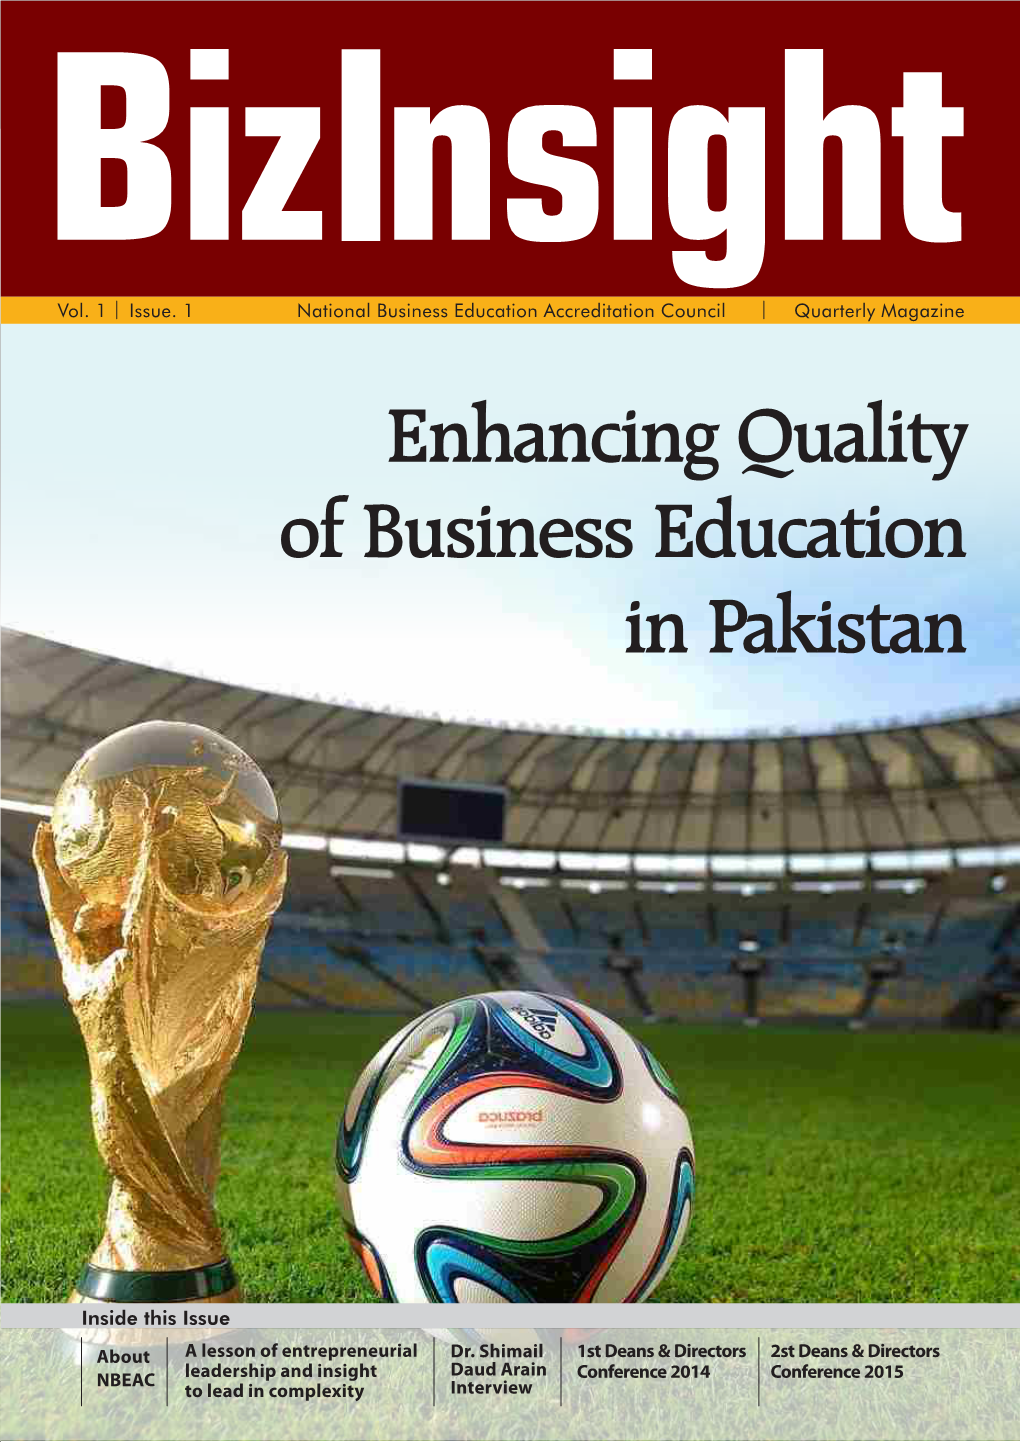 Enhancing Quality of Business Education in Pakistan